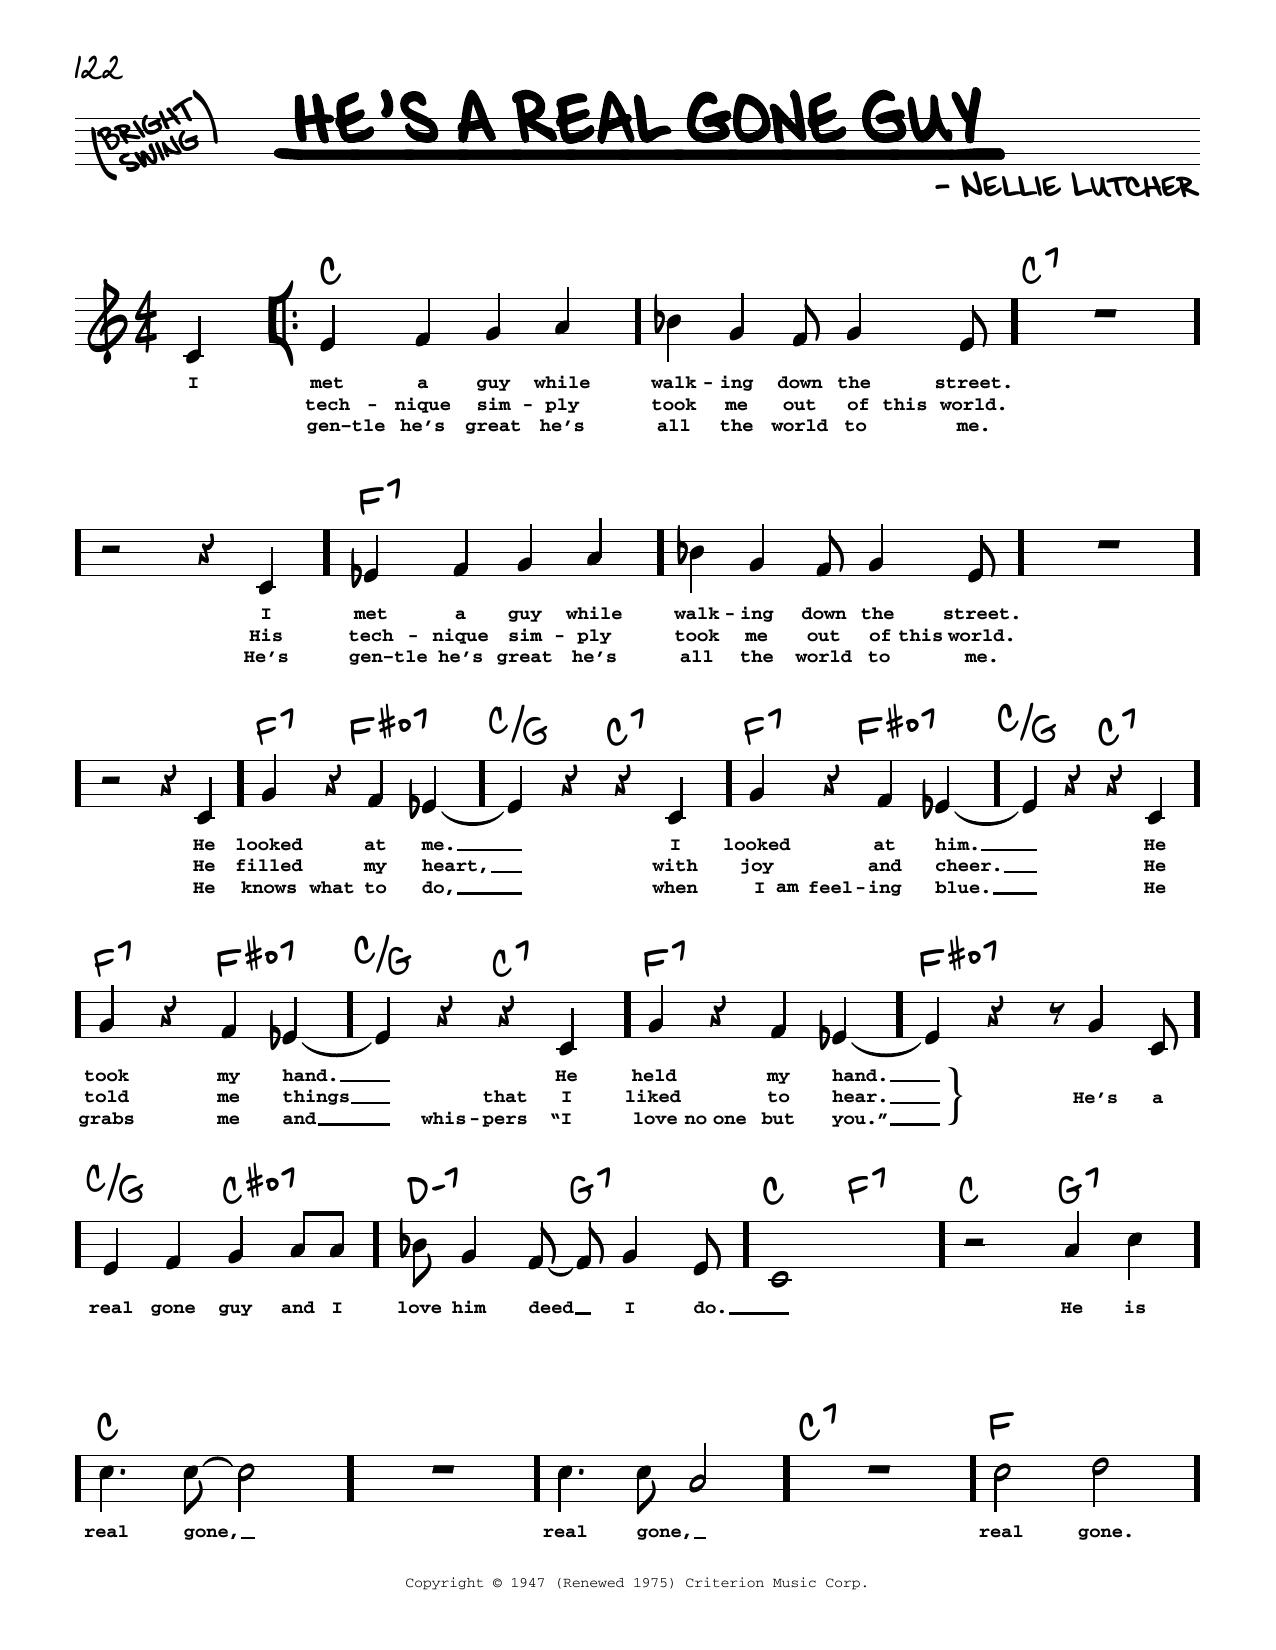 Nellie Lutcher He's A Real Gone Guy (Low Voice) sheet music notes printable PDF score